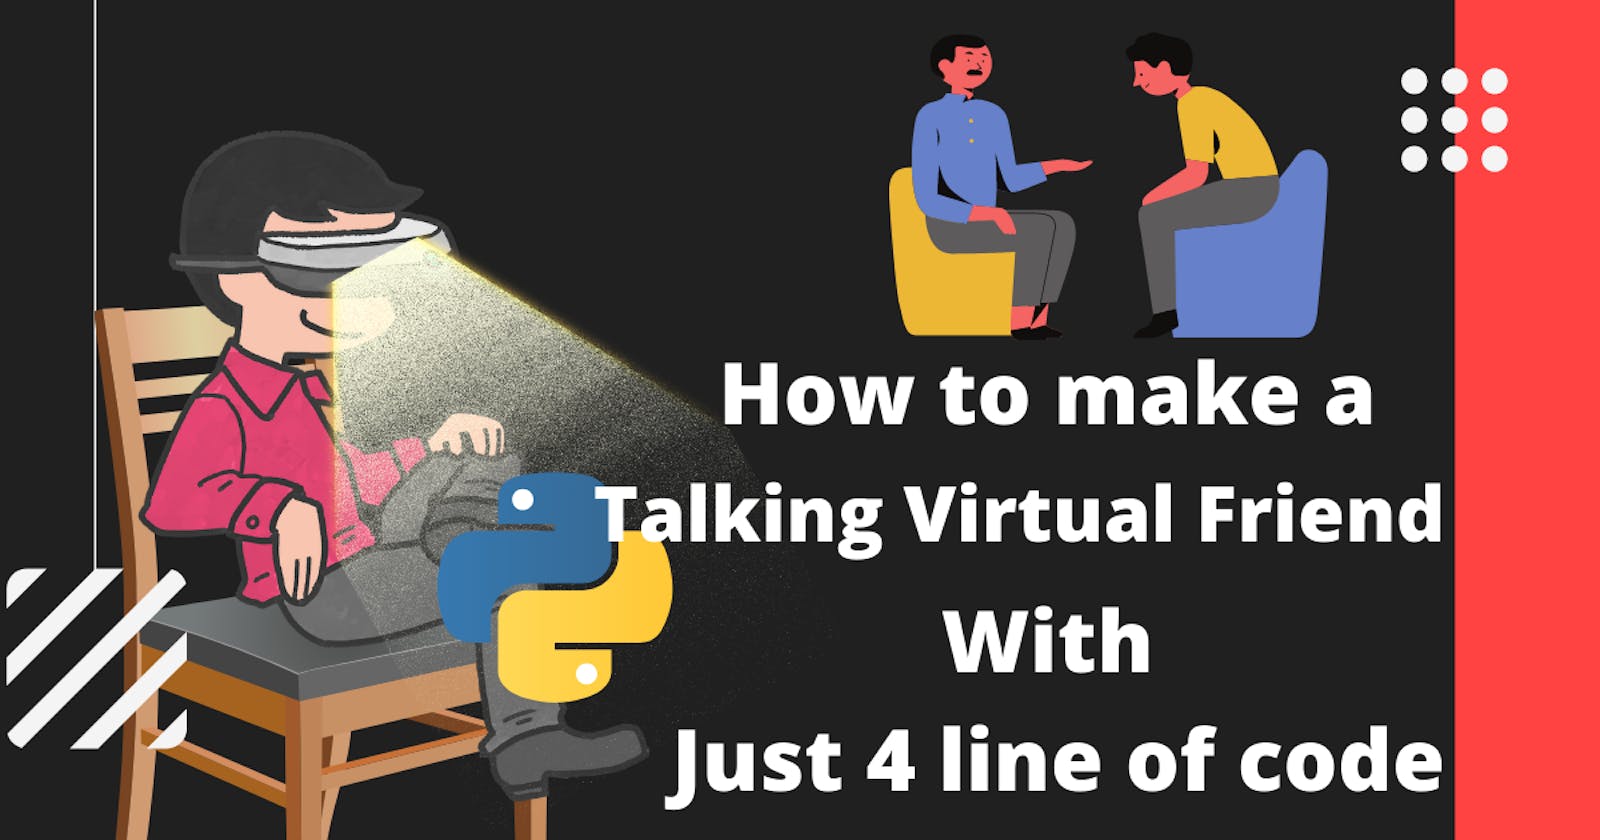 How to make a Talking Virtual Friend using just 4 lines of code